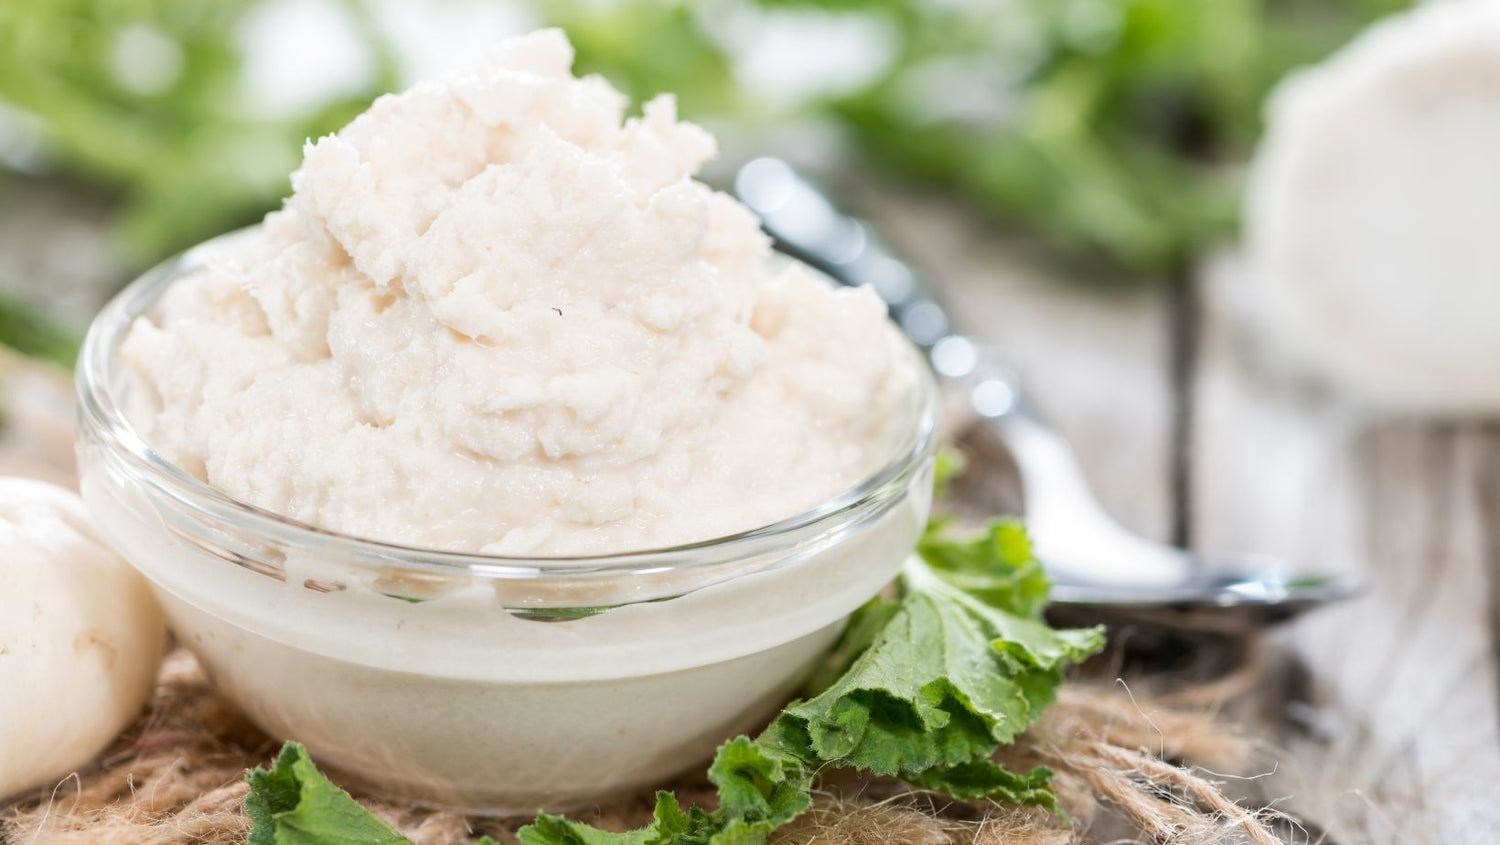 Emelia's Crème of Horseradish: Why Now is the Time to Stock Up